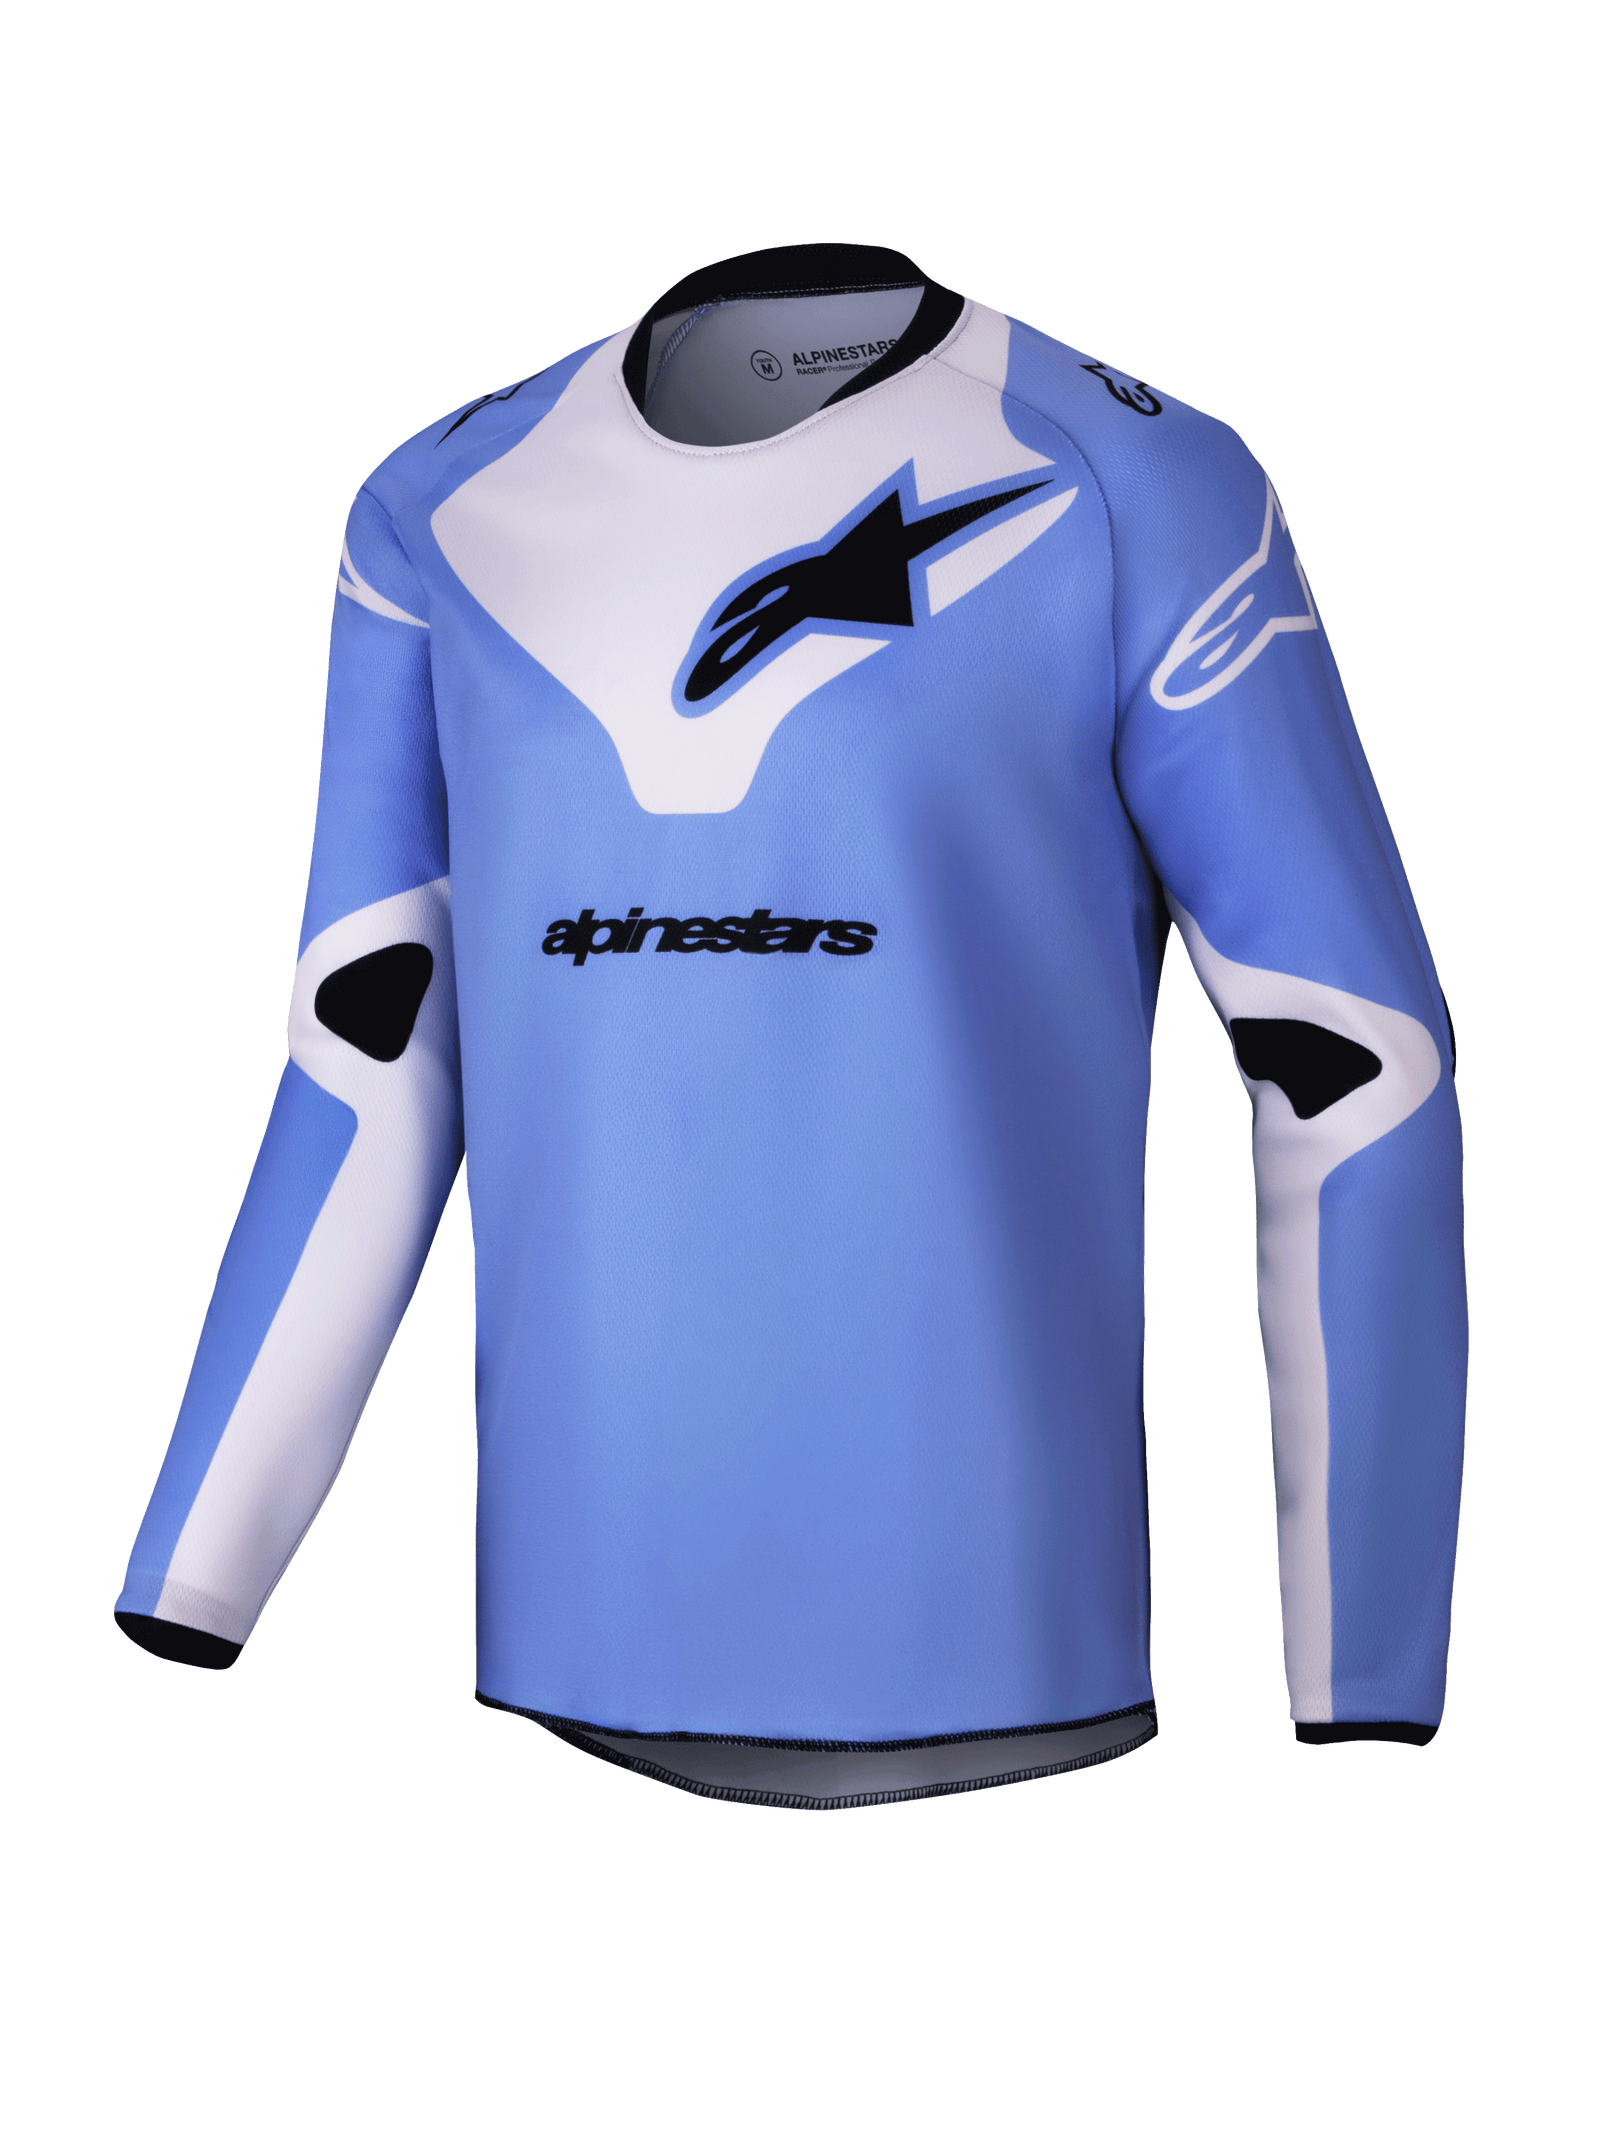 Youth Racer Veil Jersey